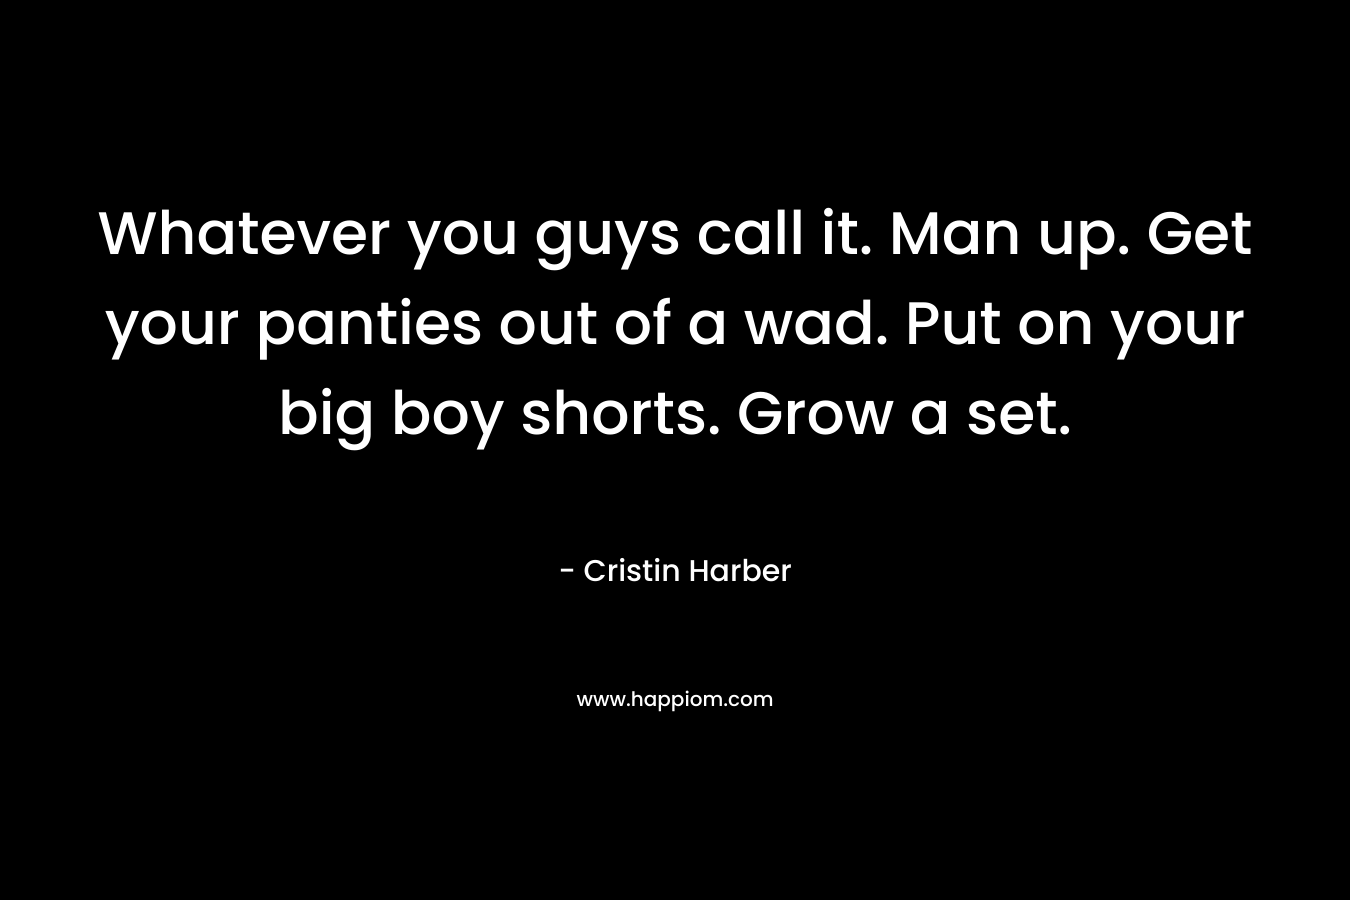 Whatever you guys call it. Man up. Get your panties out of a wad. Put on your big boy shorts. Grow a set.